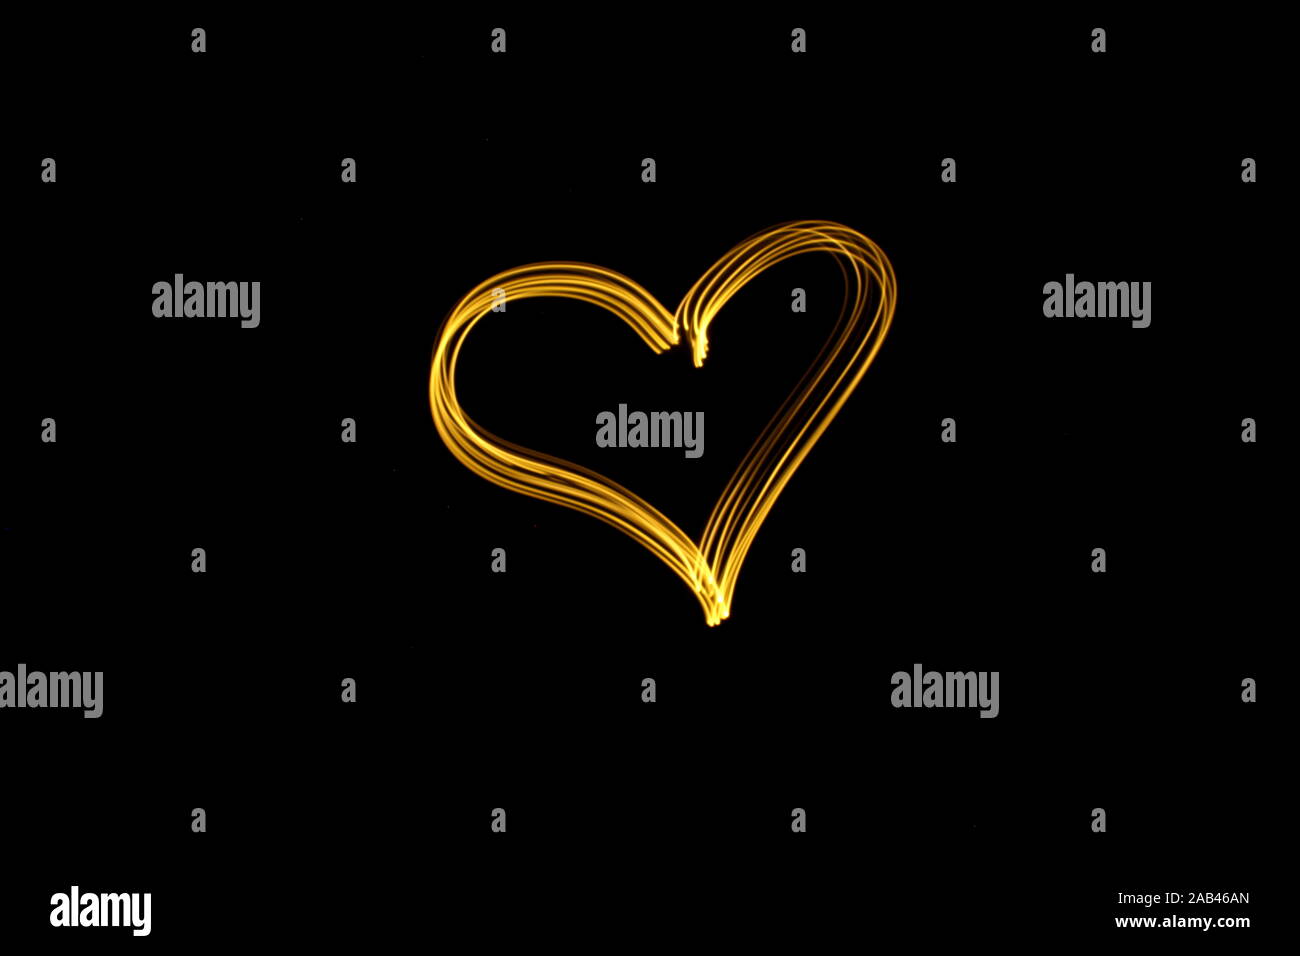 Long exposure photograph of neon gold color in a heart outline shape, against a black background. Light painting photography. Love, romance concept Stock Photo